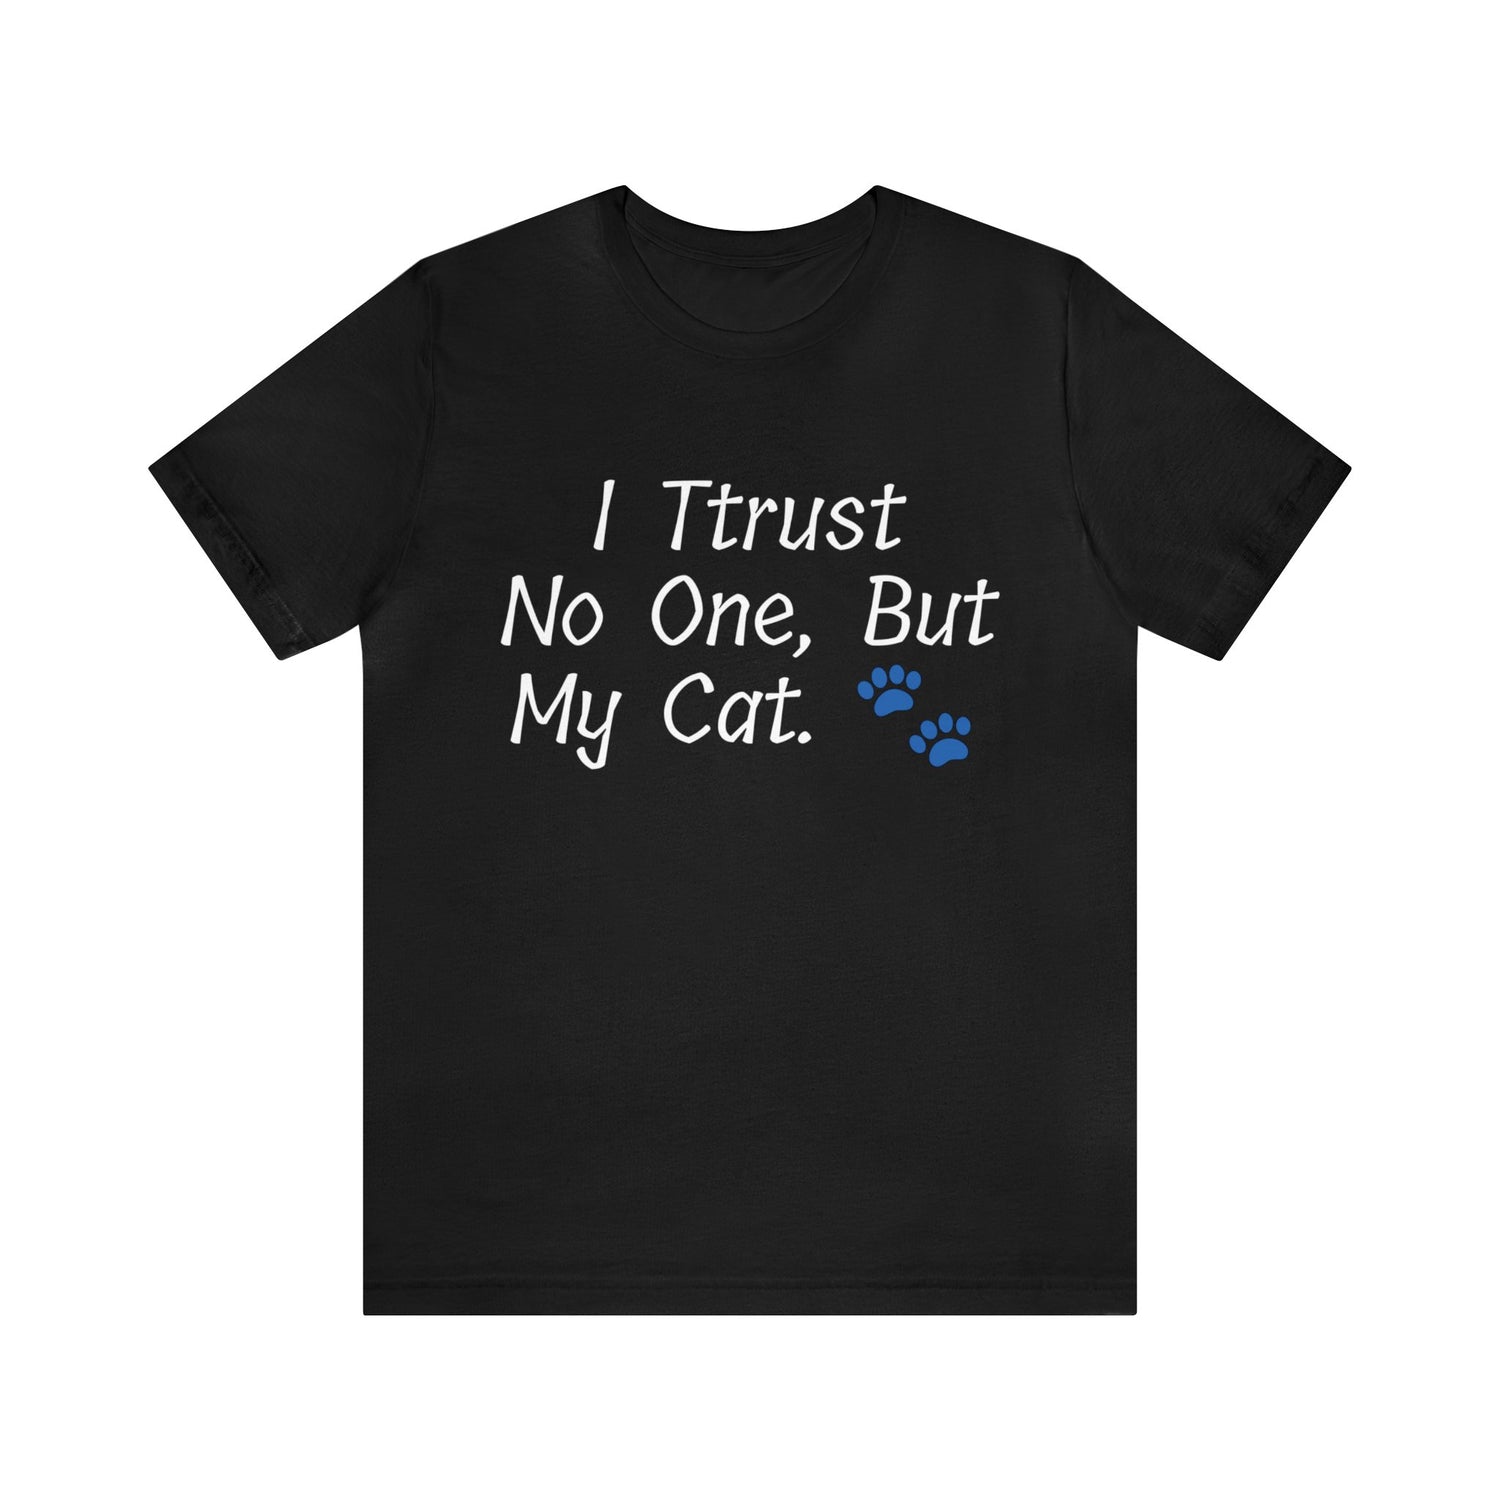 Breathable Material Cat Appreciation Cat Companionship Cat Connection Cat Lover Cat Owner Cat Tshirts Comfortable Fit Cotton Crew neck Fashion Statement Feline Friend Feline Loyalty Funny Tee Gift Idea Humorous Phrase Long-Lasting Durability Petrova Designs Playful Touch Quality Craftsmanship Soft Fabric Special Bond T-shirts Trusting My Cat Trustworthy Pet Unique Bond Unisex Unwavering Loyalty Wardrobe Addition